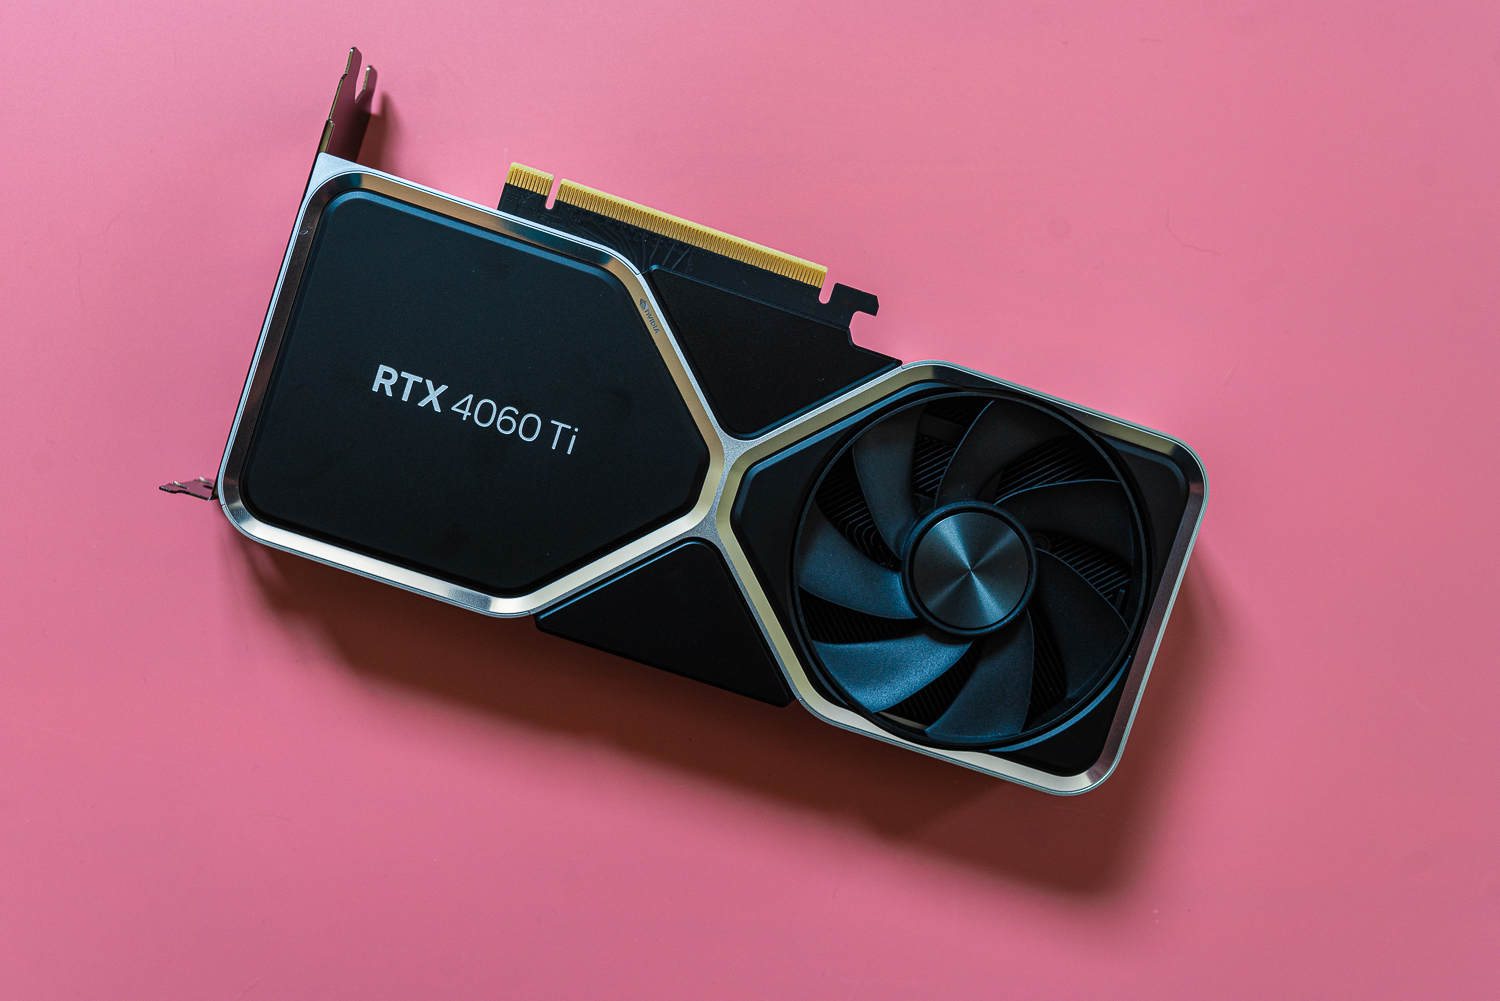 Nvidia GeForce RTX 4060 Ti 16GB Review: Does More VRAM Help